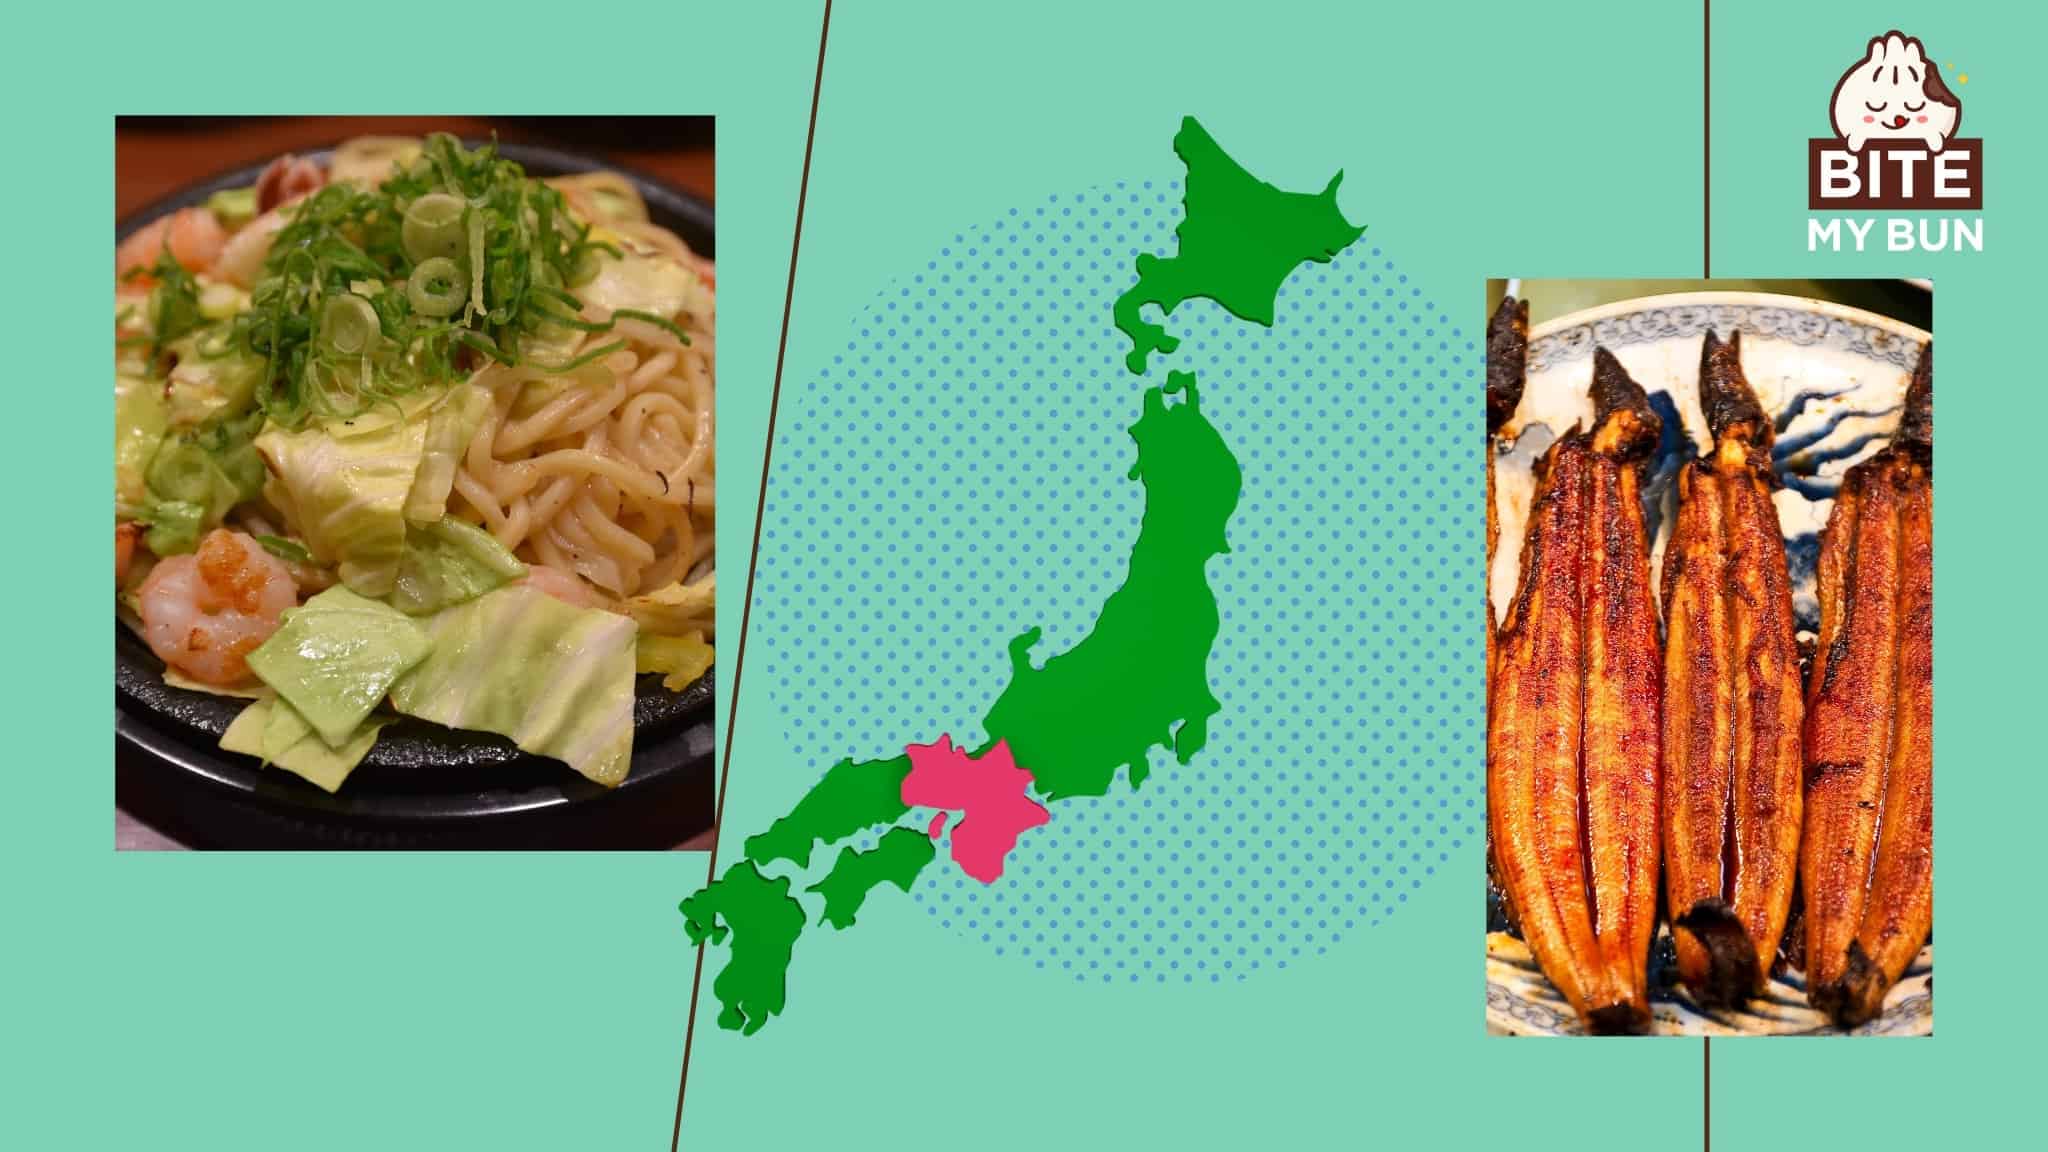 Kansai Cuisine: Typical Food From the Region